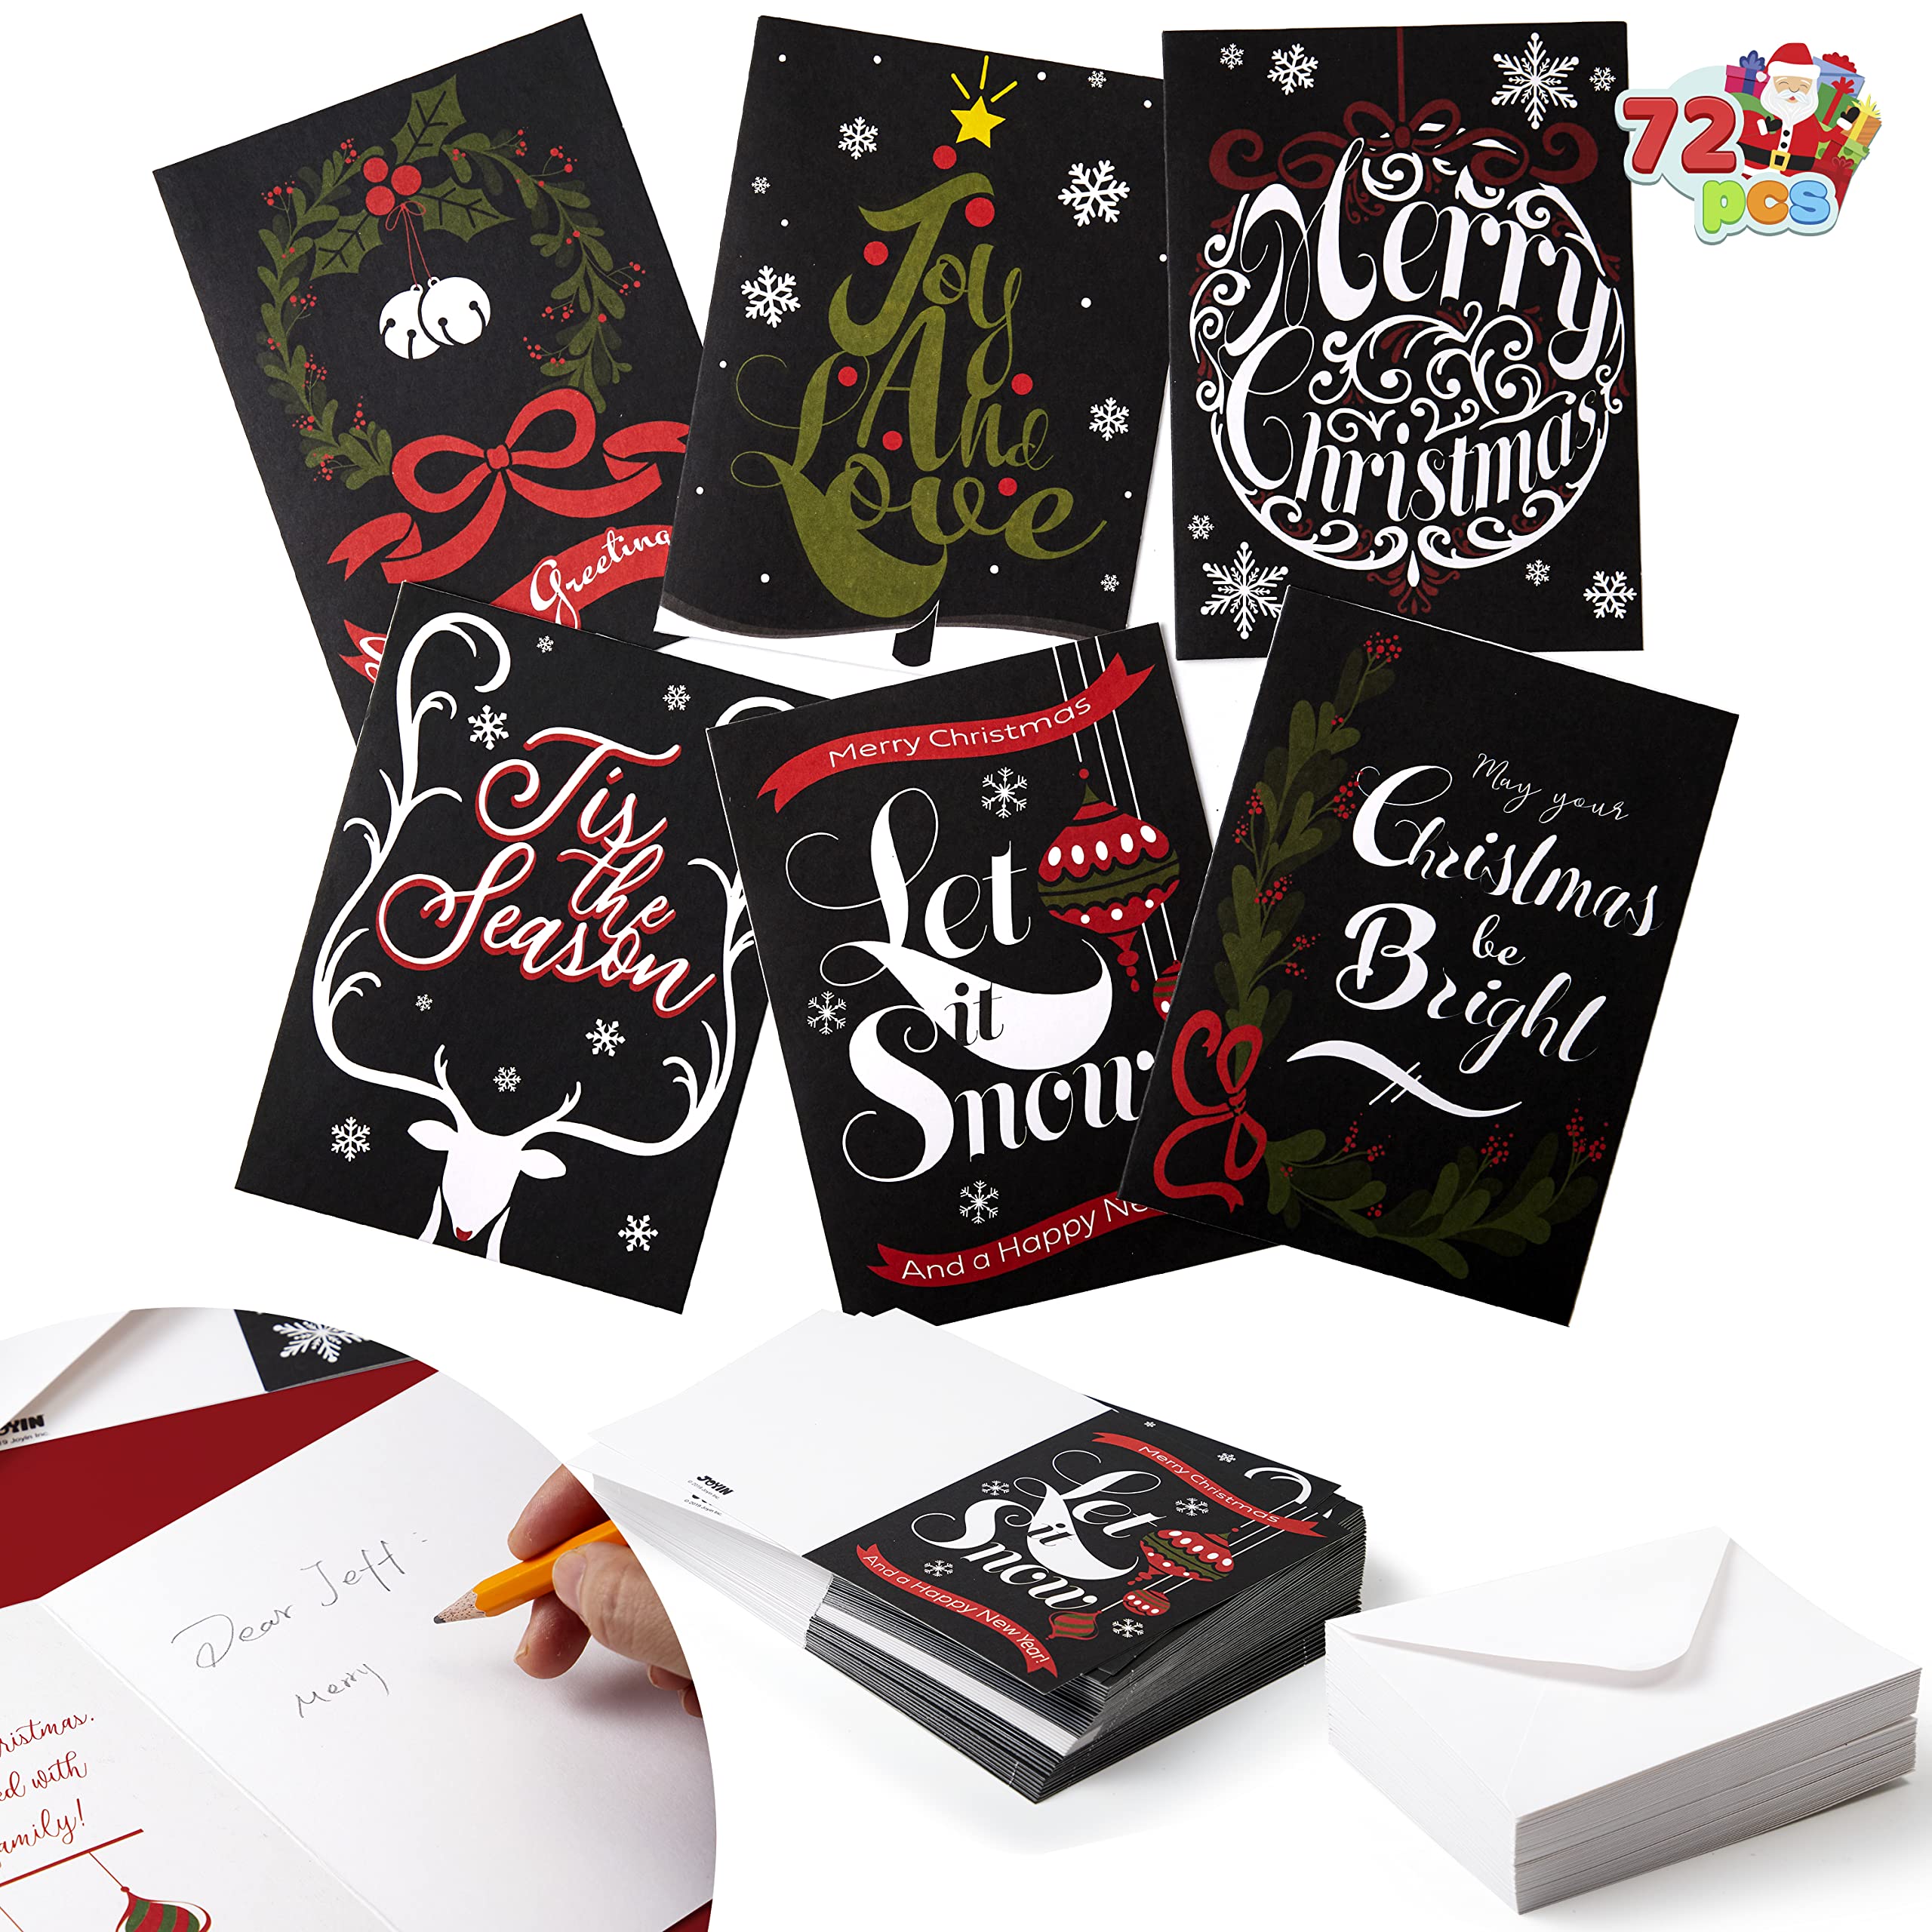 JOYIN 72 Piece Holiday Christmas Greeting Cards with 6 Artistic Greeting Designs & Envelopes 6.25” x 4.6